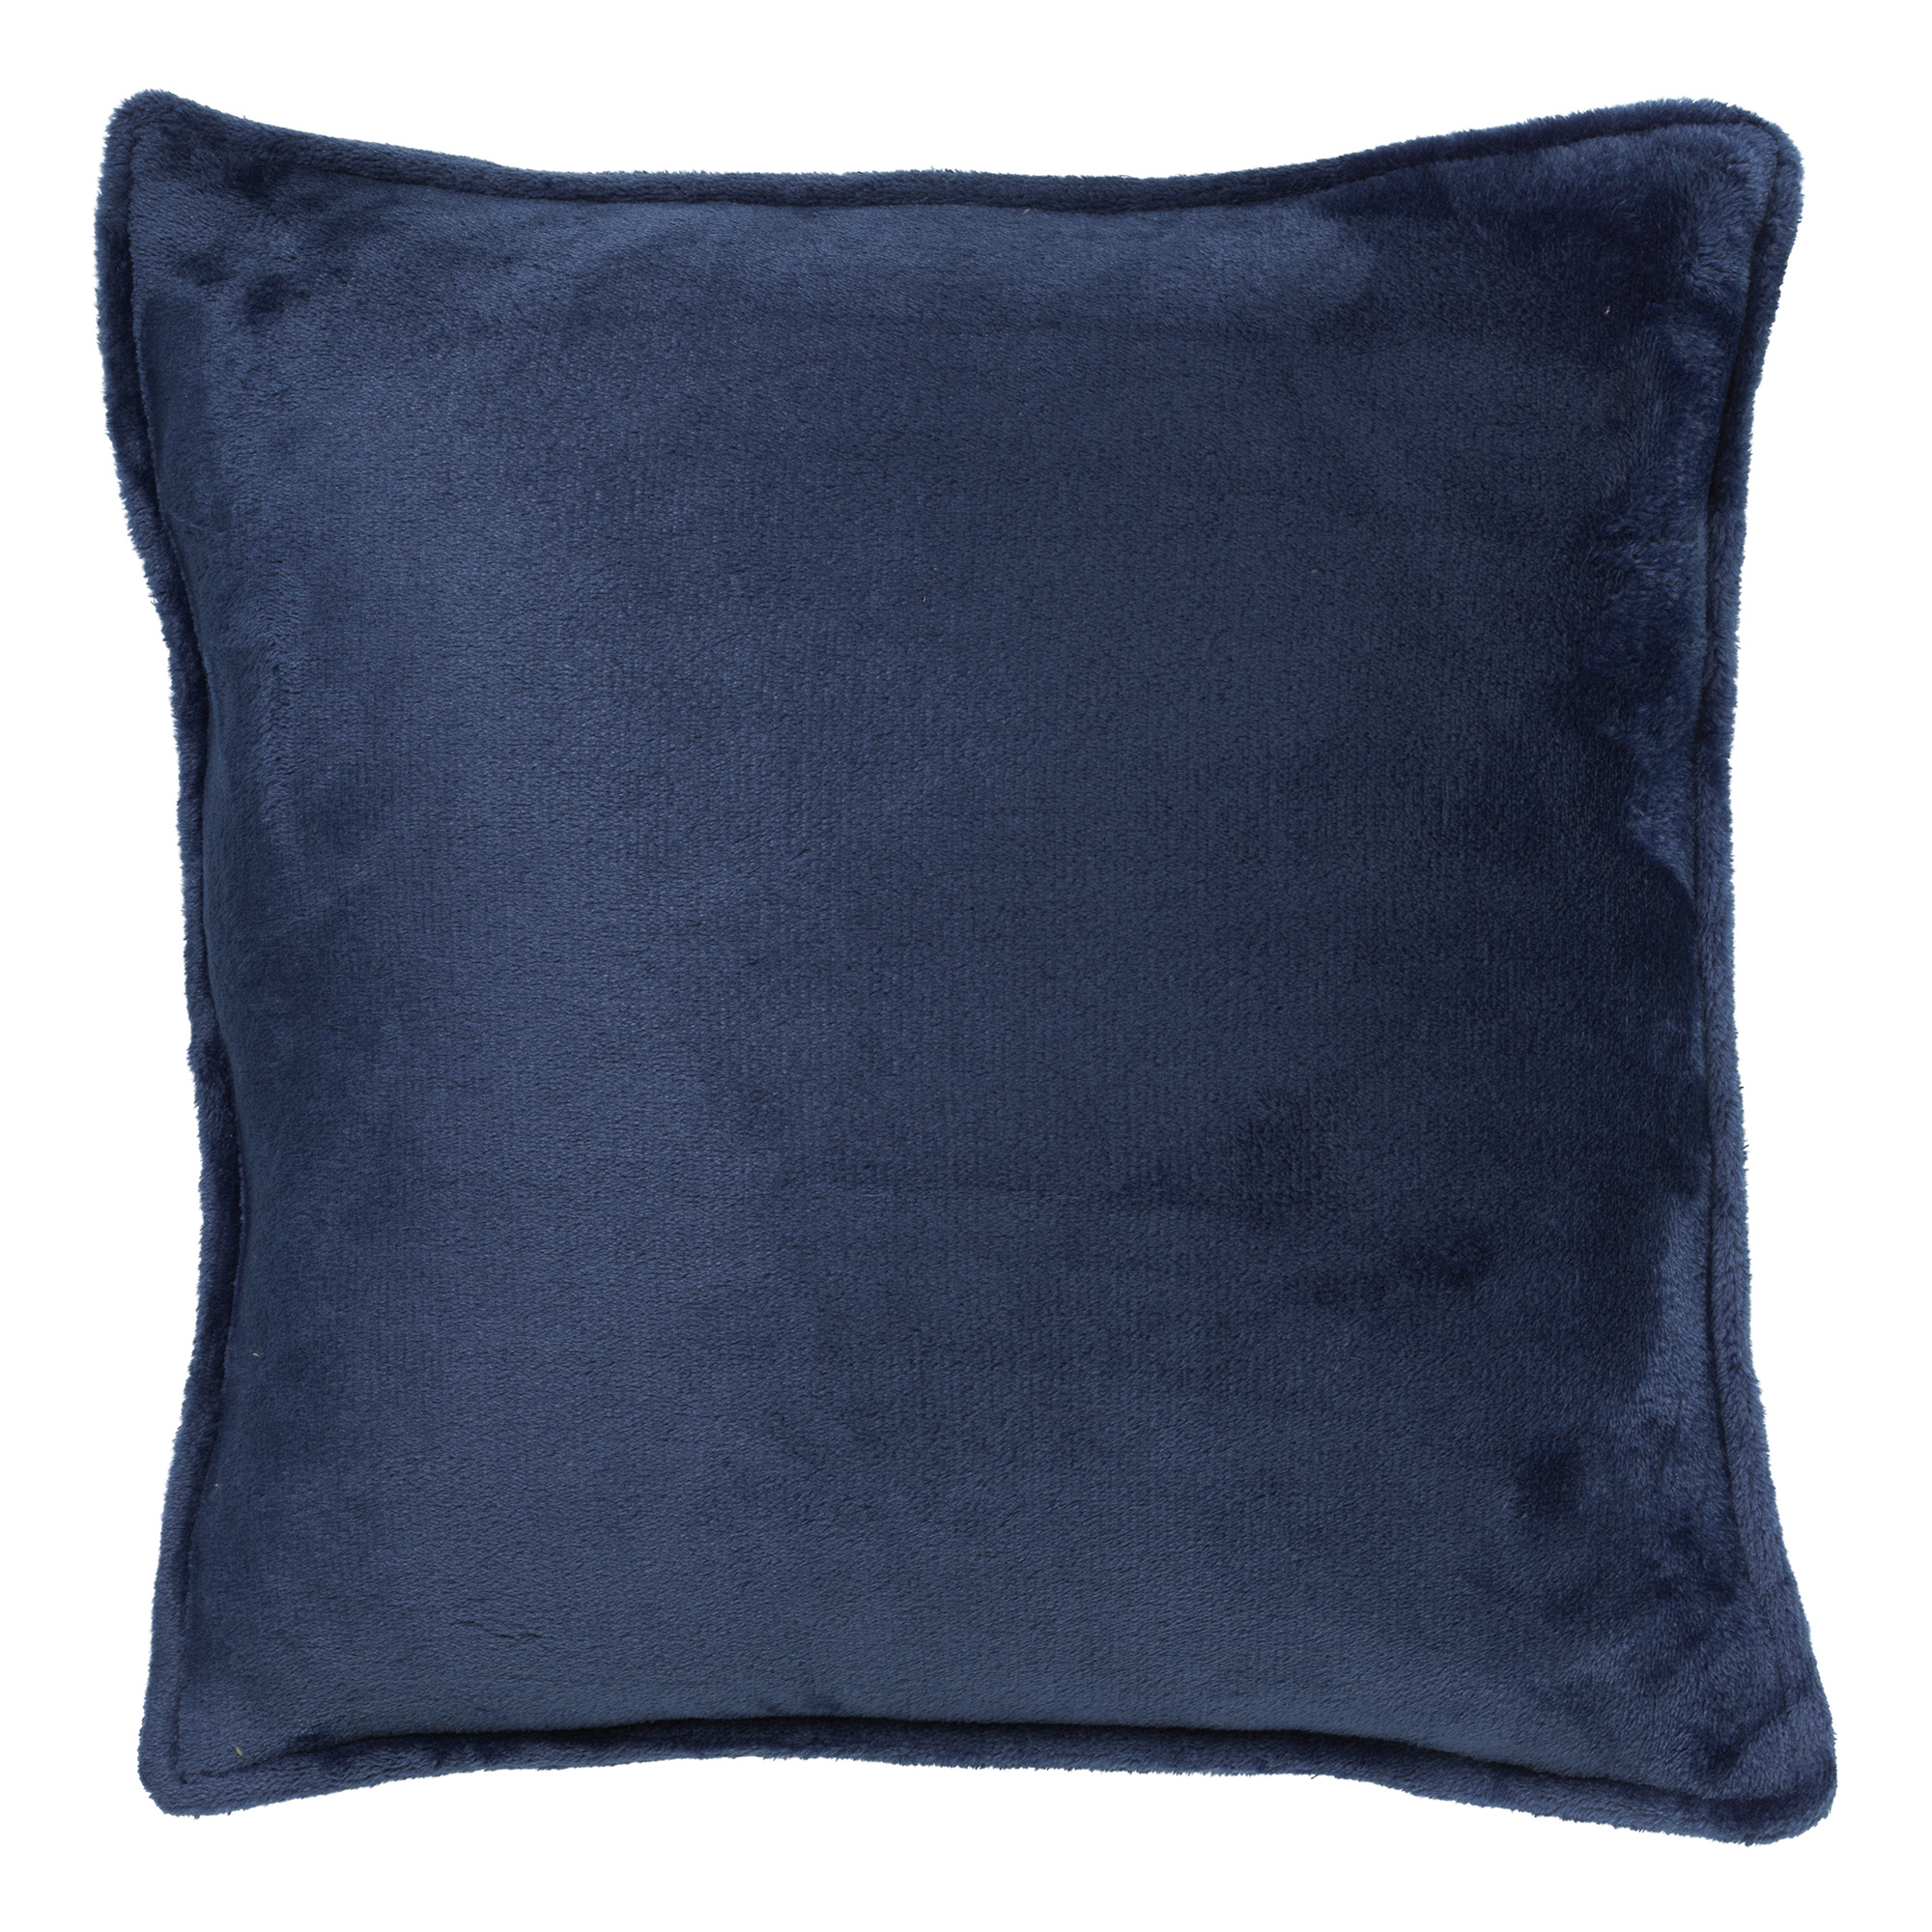 CILLY - Kussenhoes fleece 45x45 cm - Insignia Blue - donkerblauw